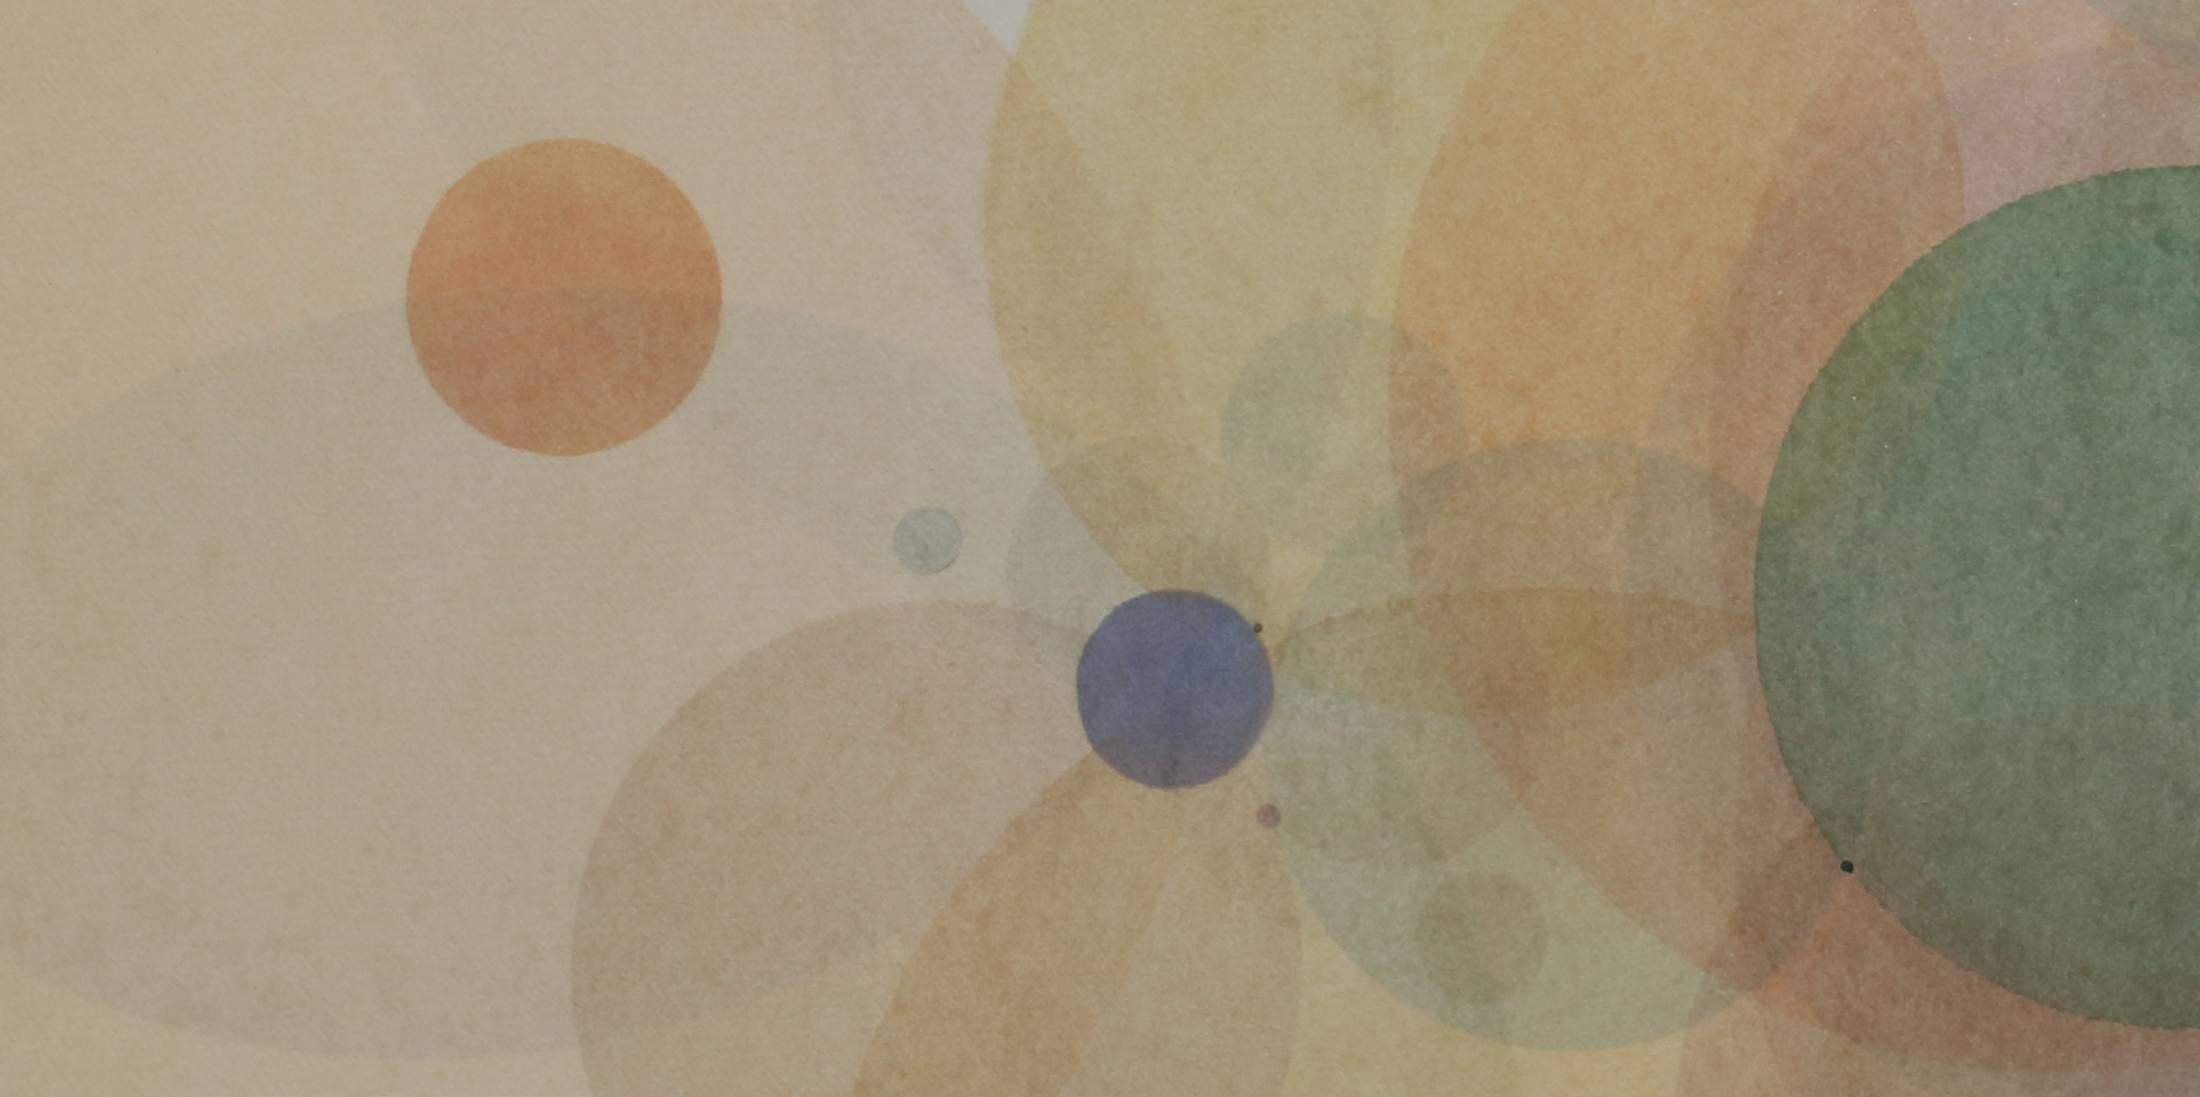 Day Map 718 - Soft pastel color abstract geometric circles watercolor on paper - Abstract Geometric Art by Evan Venegas